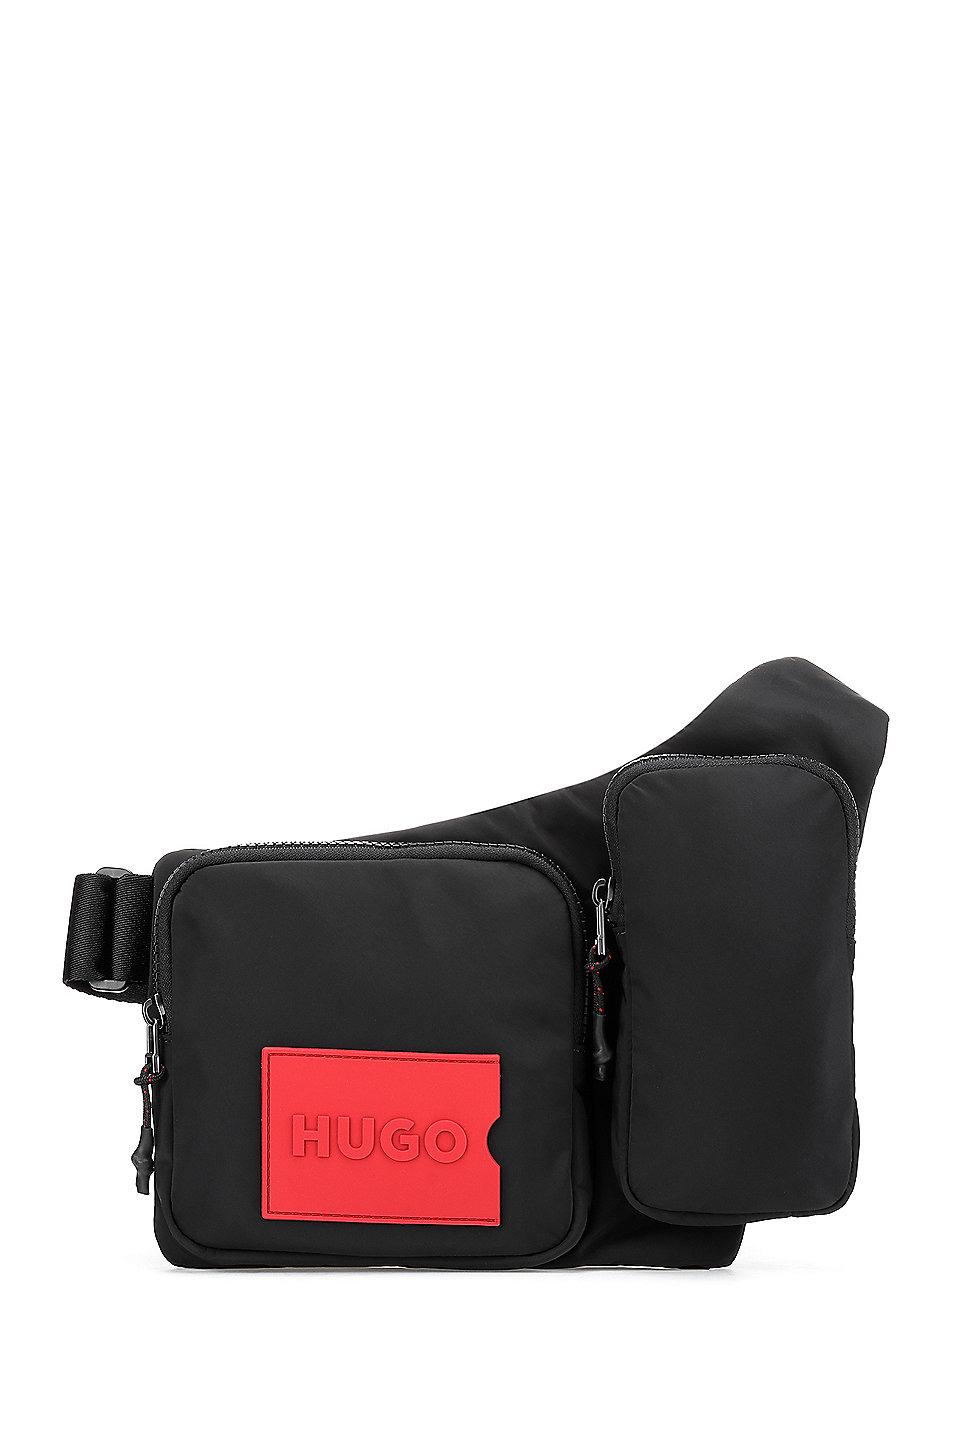 HUGO - Recycled-nylon envelope bag with red logo patch